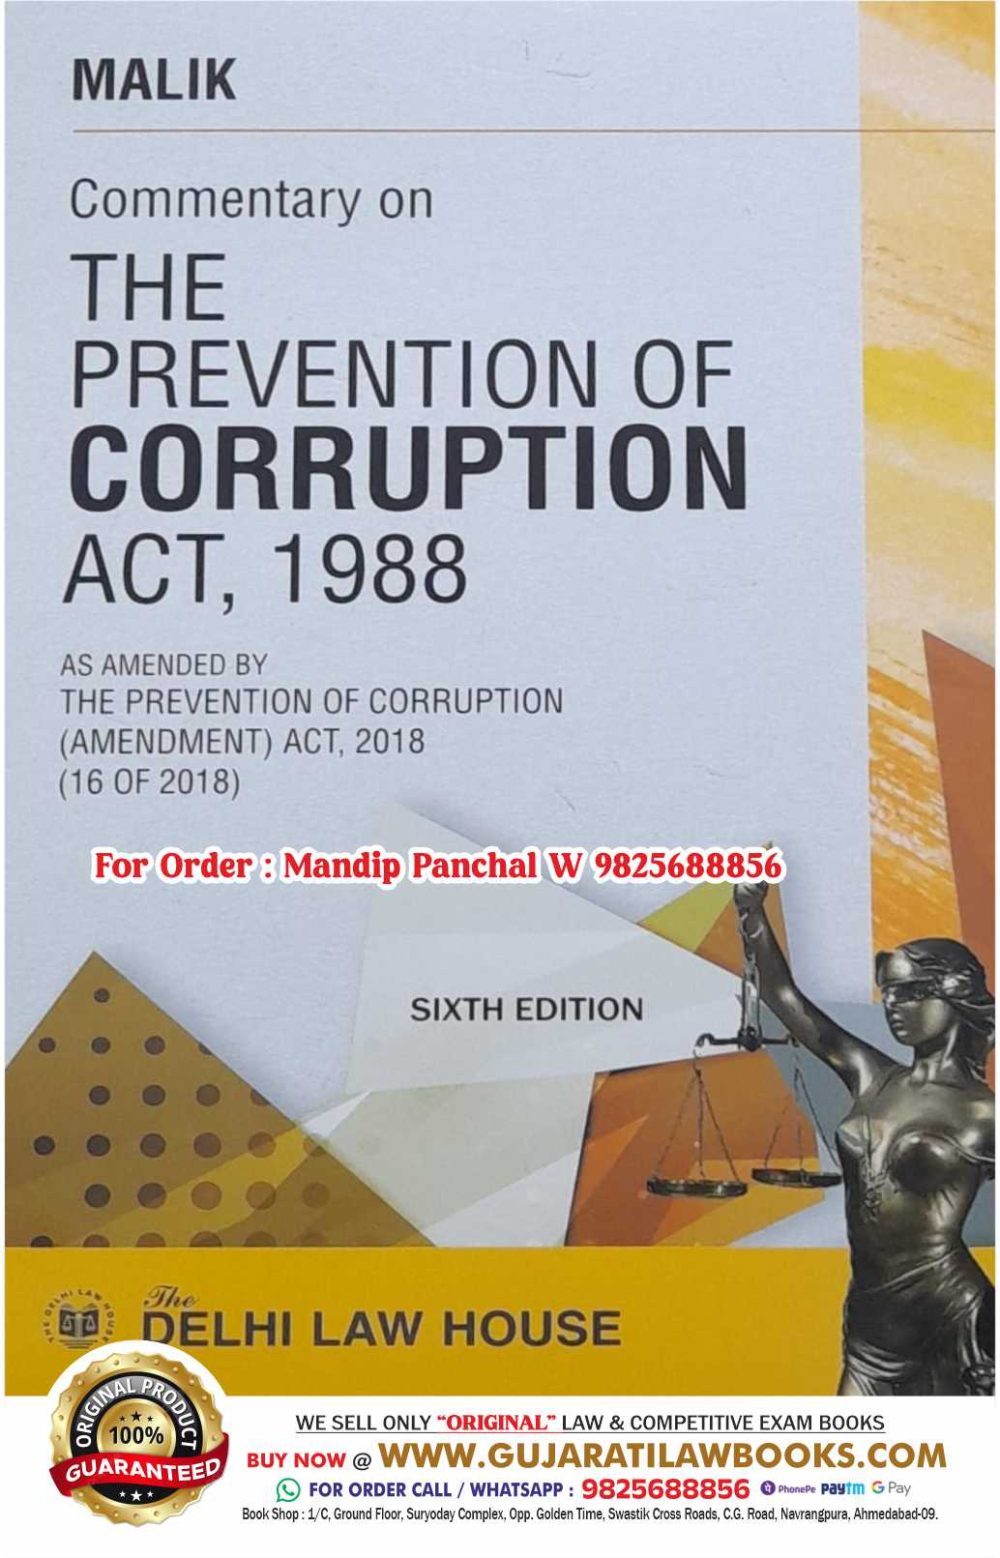 Malik's COMMENTARY ON THE PREVENTION OF CORRUPTION ACT, 1988 - Latest 6th Edition March 2024 Delhi law House